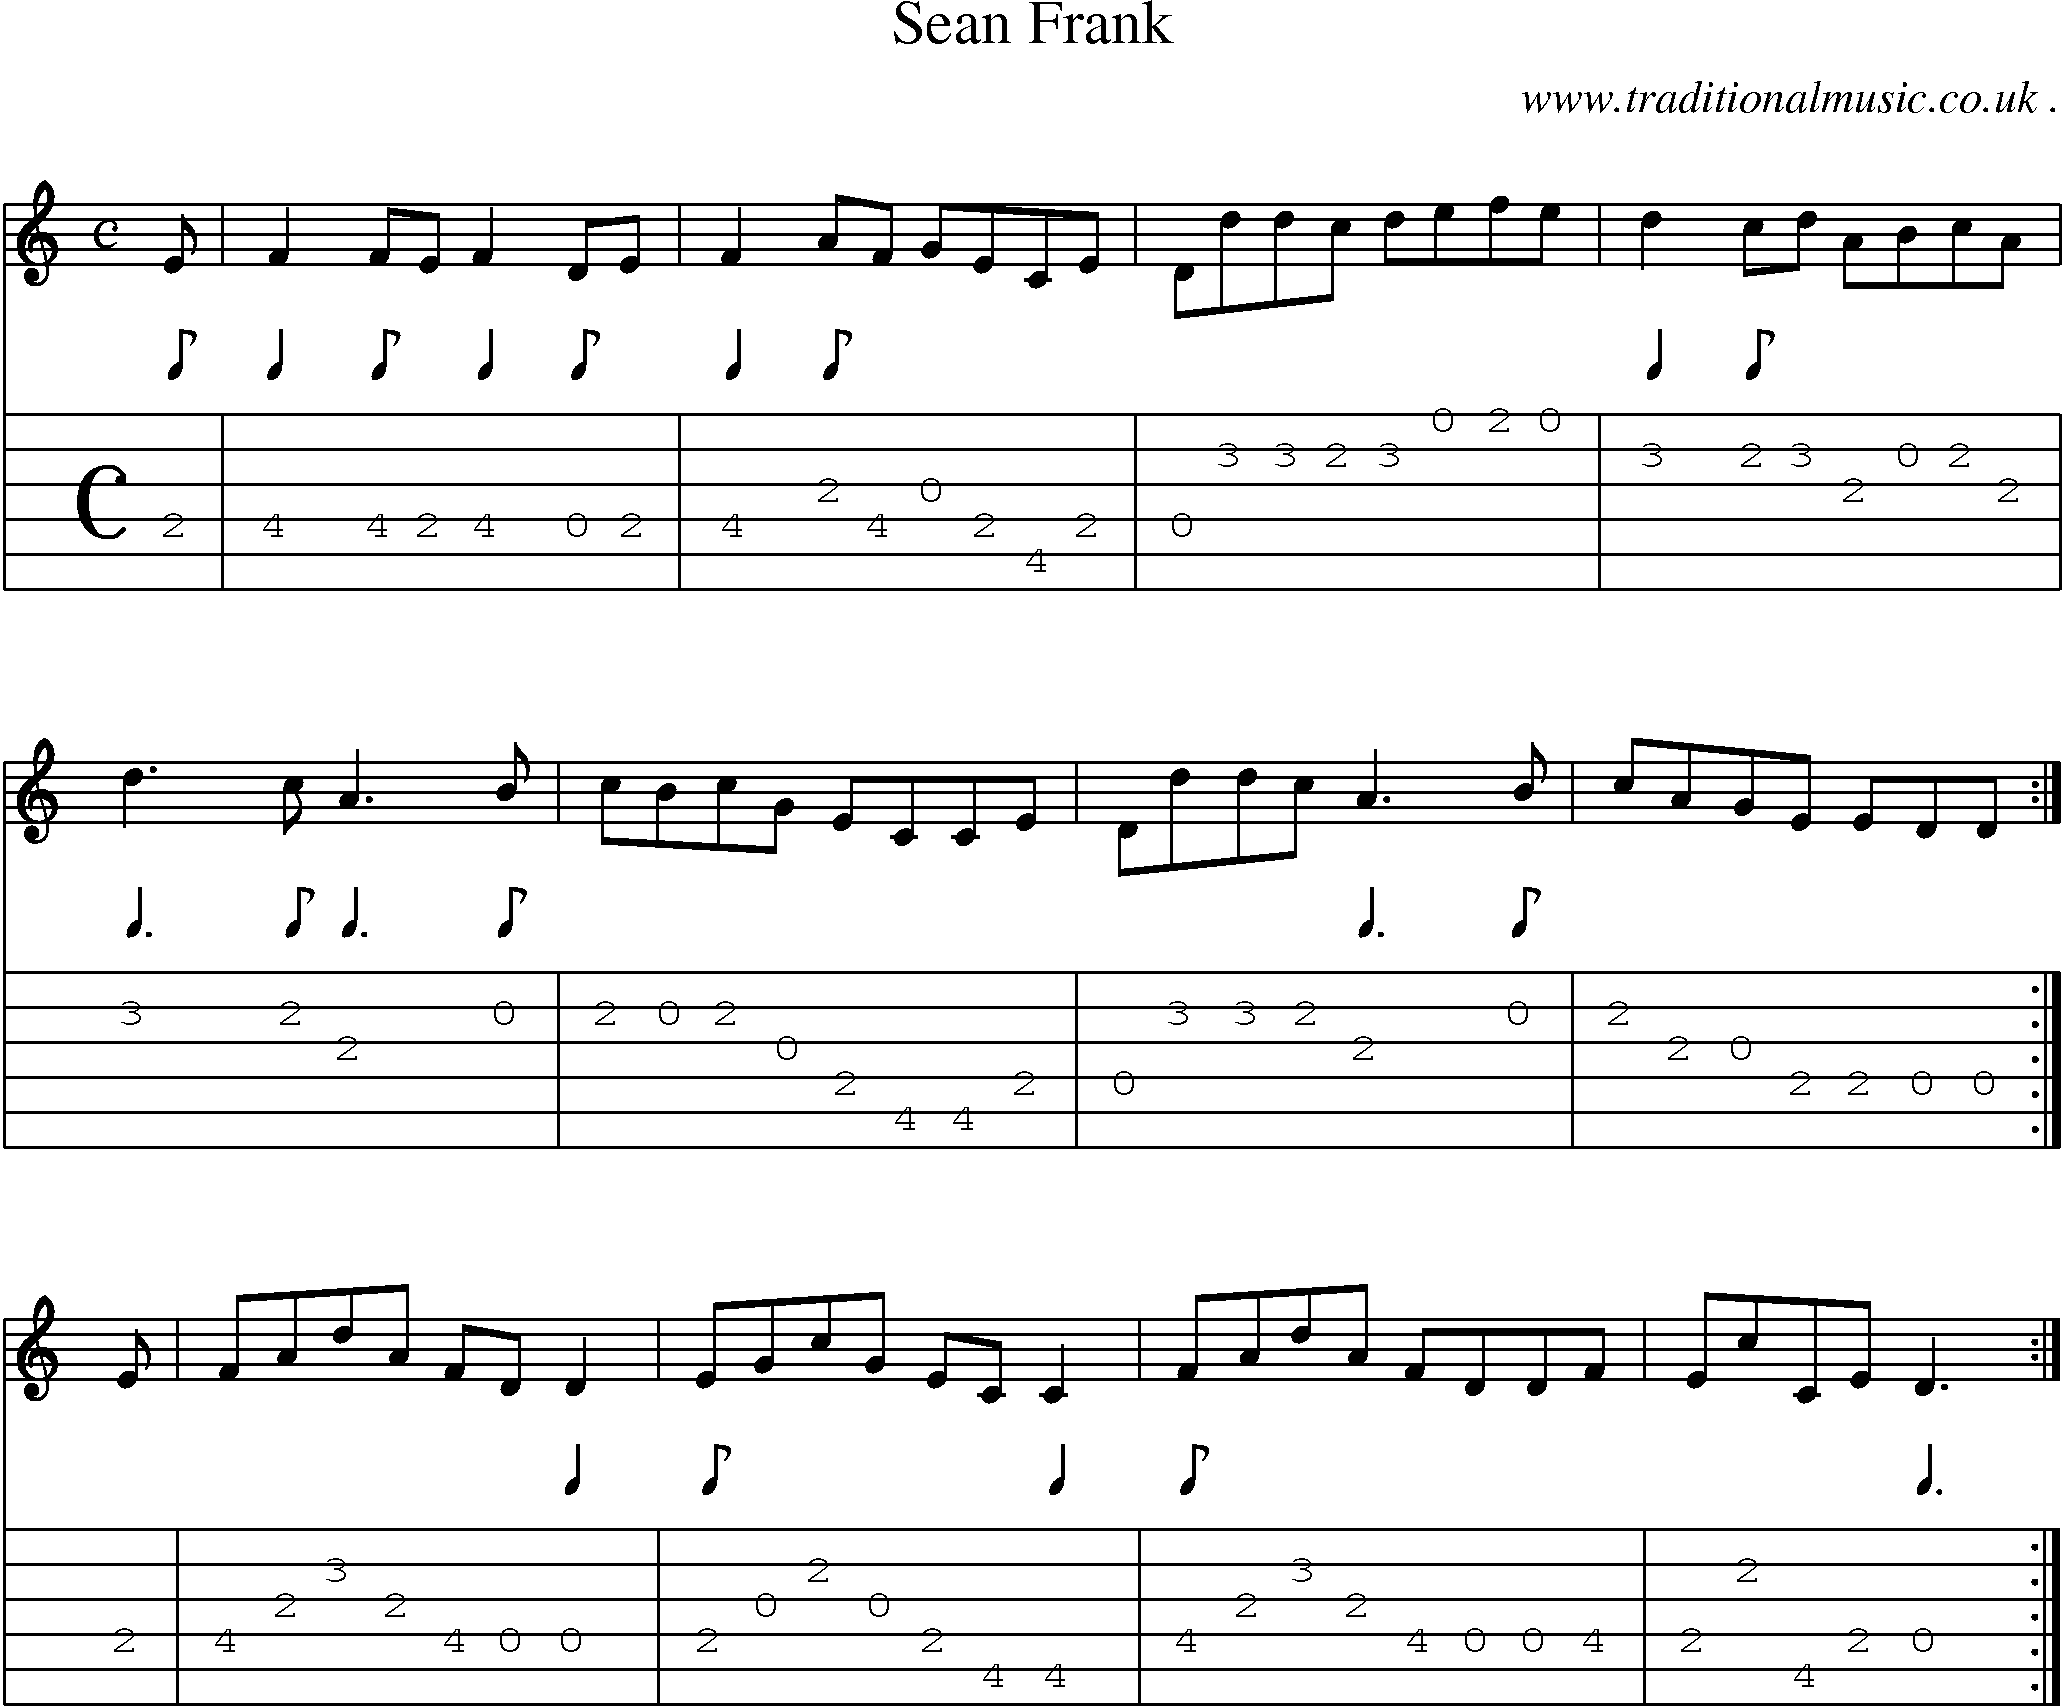 Sheet-Music and Guitar Tabs for Sean Frank